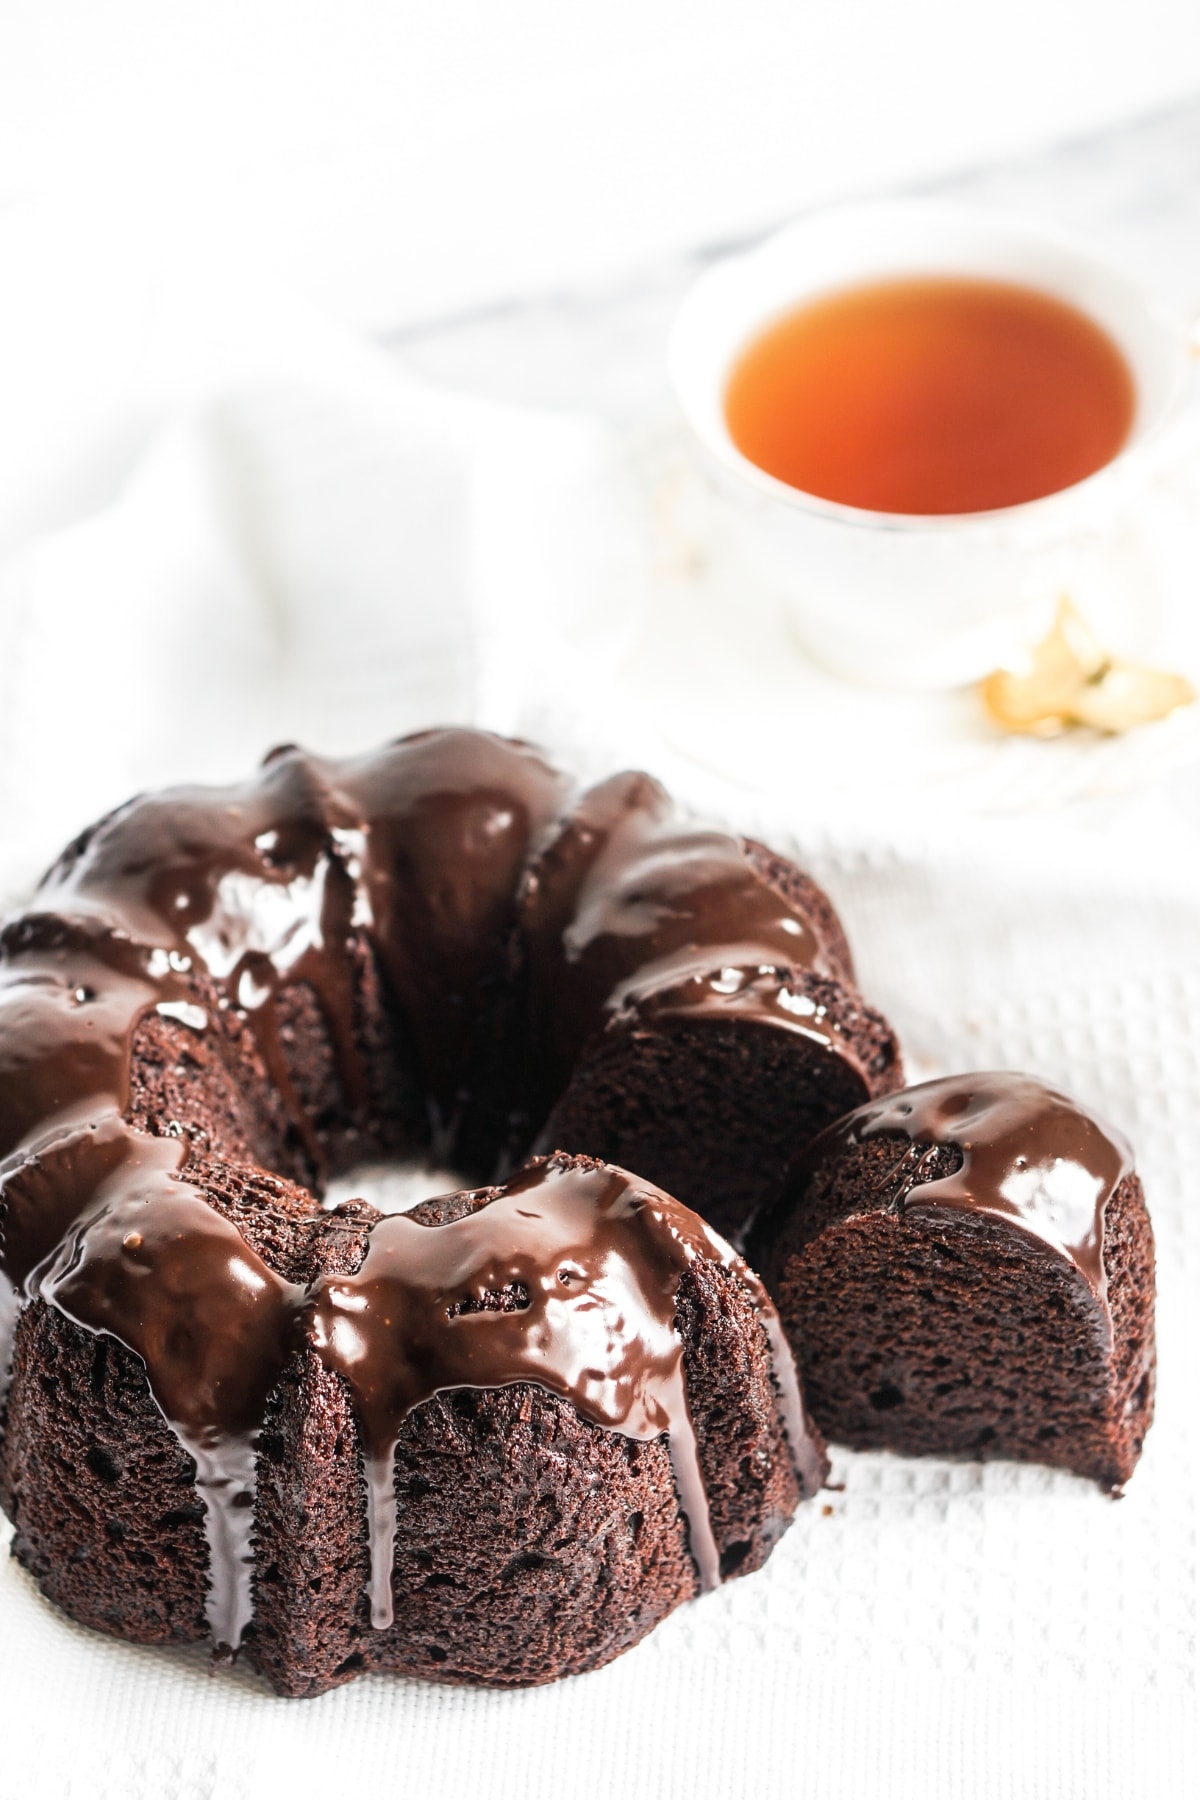 Chocolate Pound Cake (Old-Fashioned Recipe) featuring Chocolate Pound Cake covered in chocolate ganache with a slice taken out of it and a cup of tea in the background.